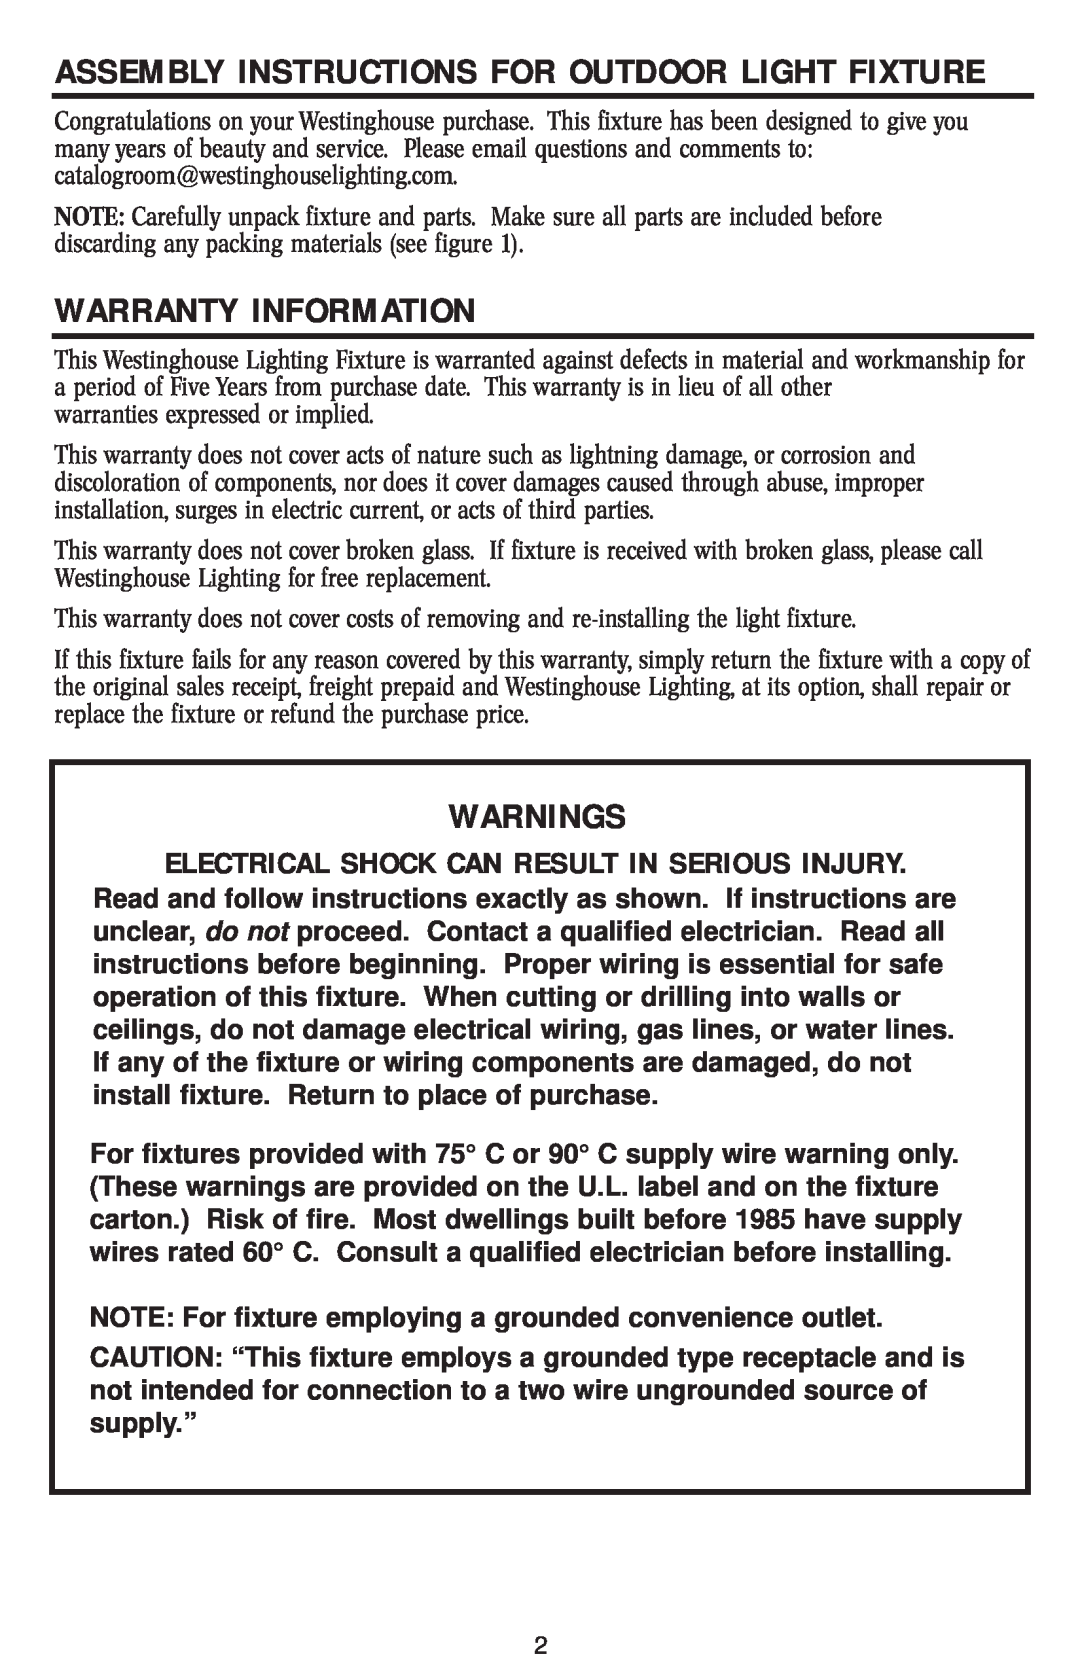 Westinghouse W-105 owner manual Warranty Information, Warnings, Assembly Instructions For Outdoor Light Fixture 